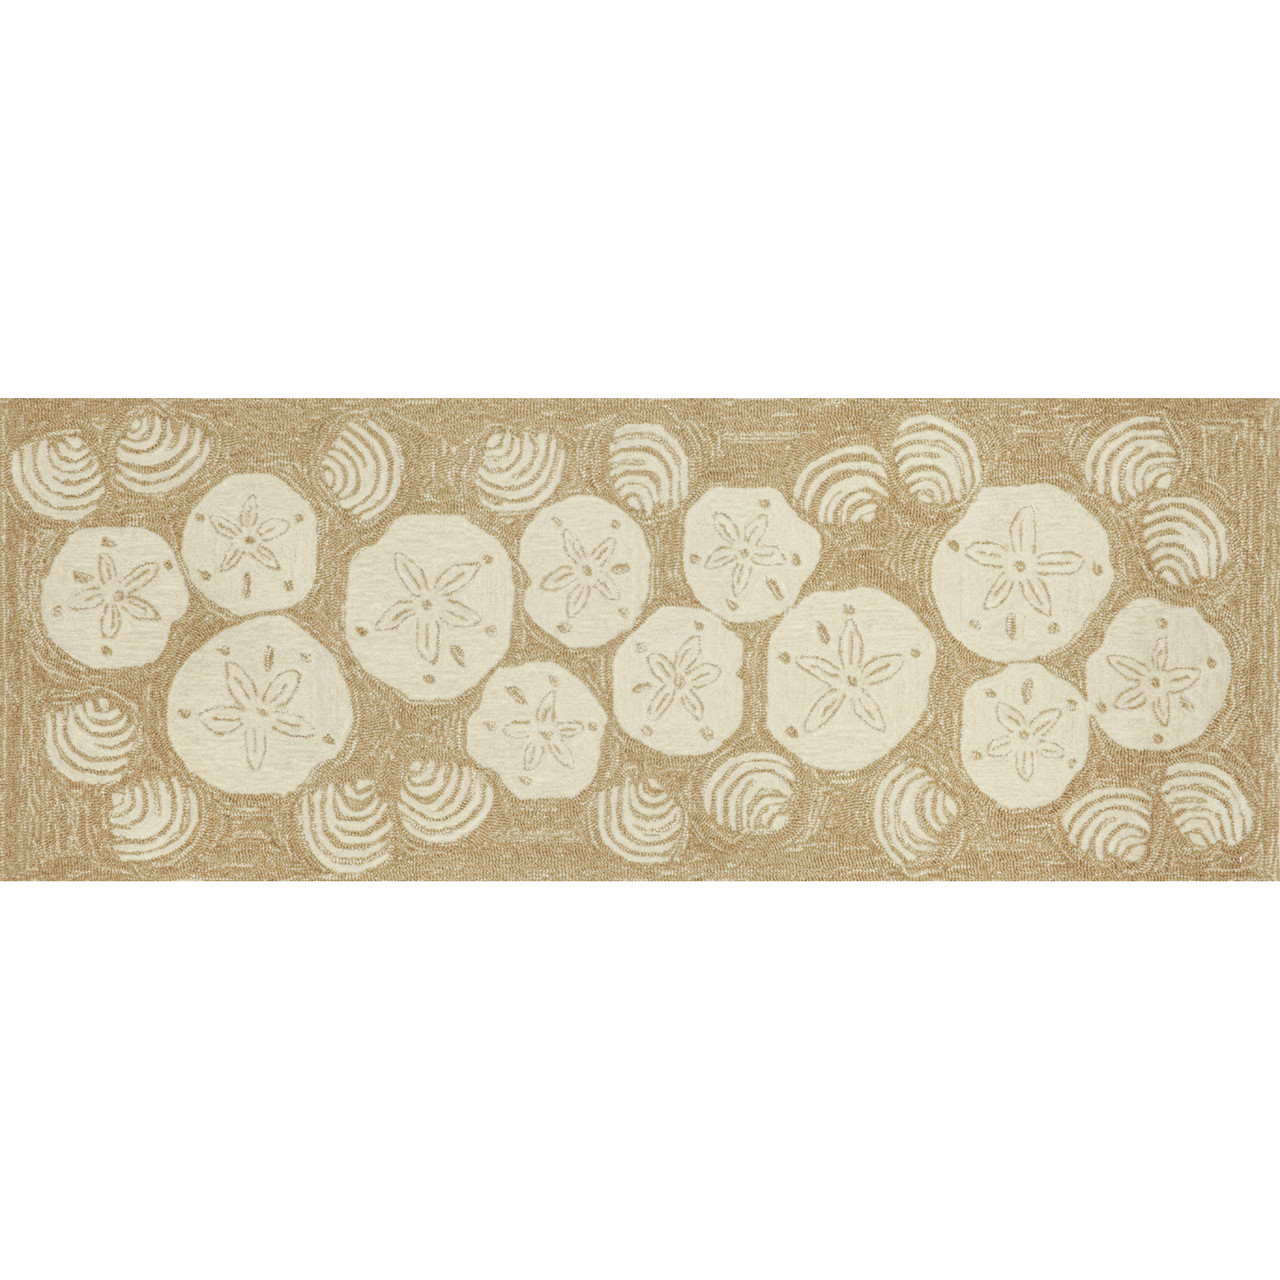 Frontporch Shell Toss Indoor/Outdoor Rug  - Natural - 4 Sizes